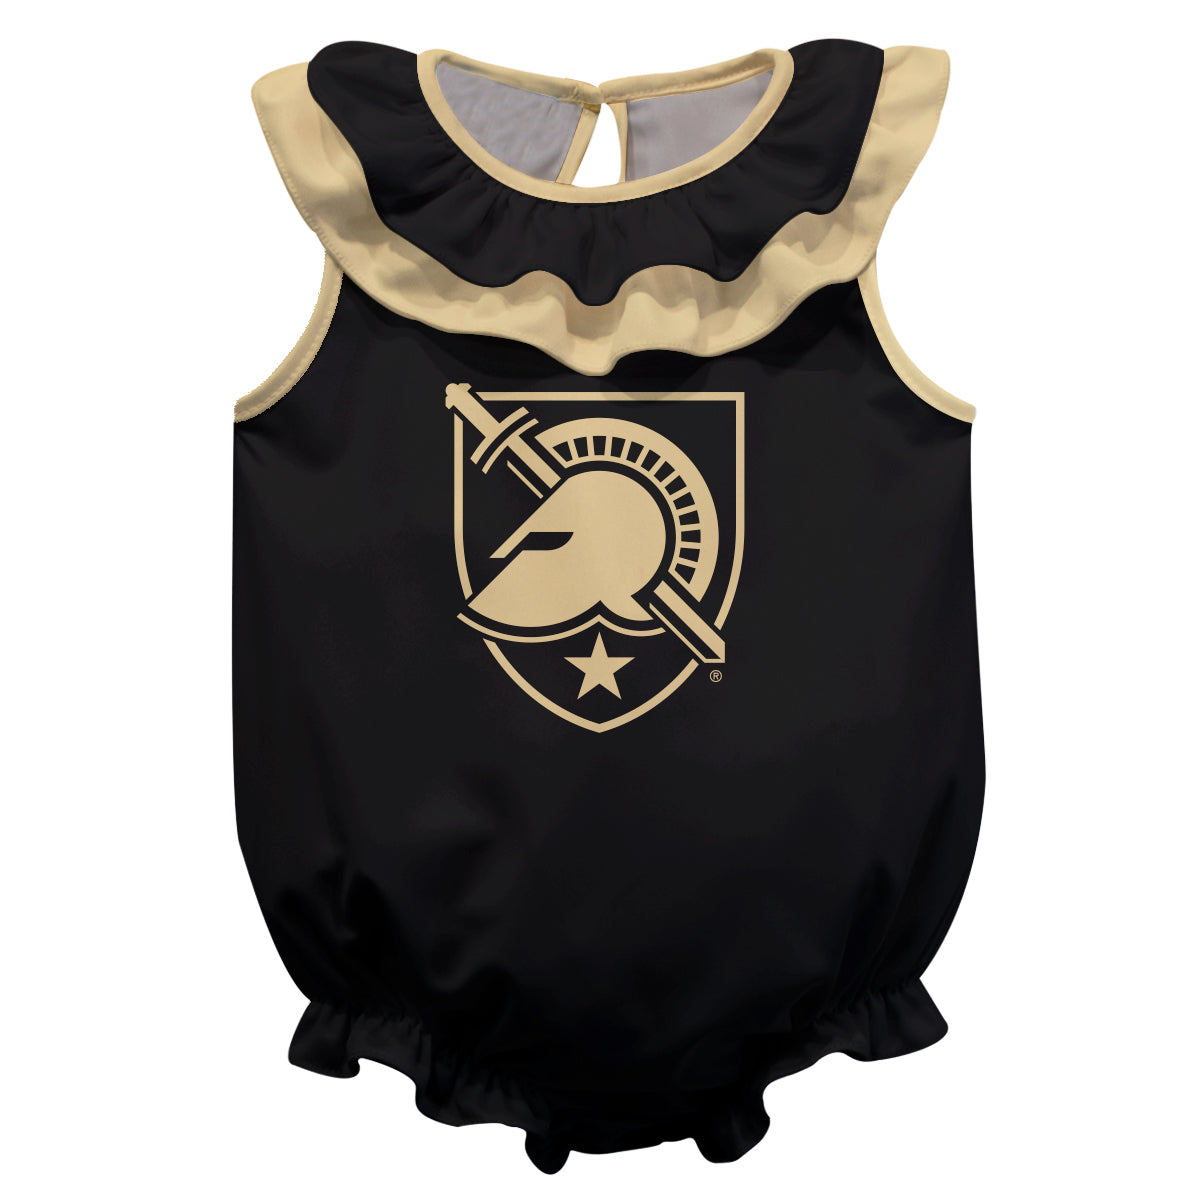 US Military ARMY Black Knights Black Sleeveless Ruffle One Piece Jumpsuit Mascot Bodysuit by Vive La Fete